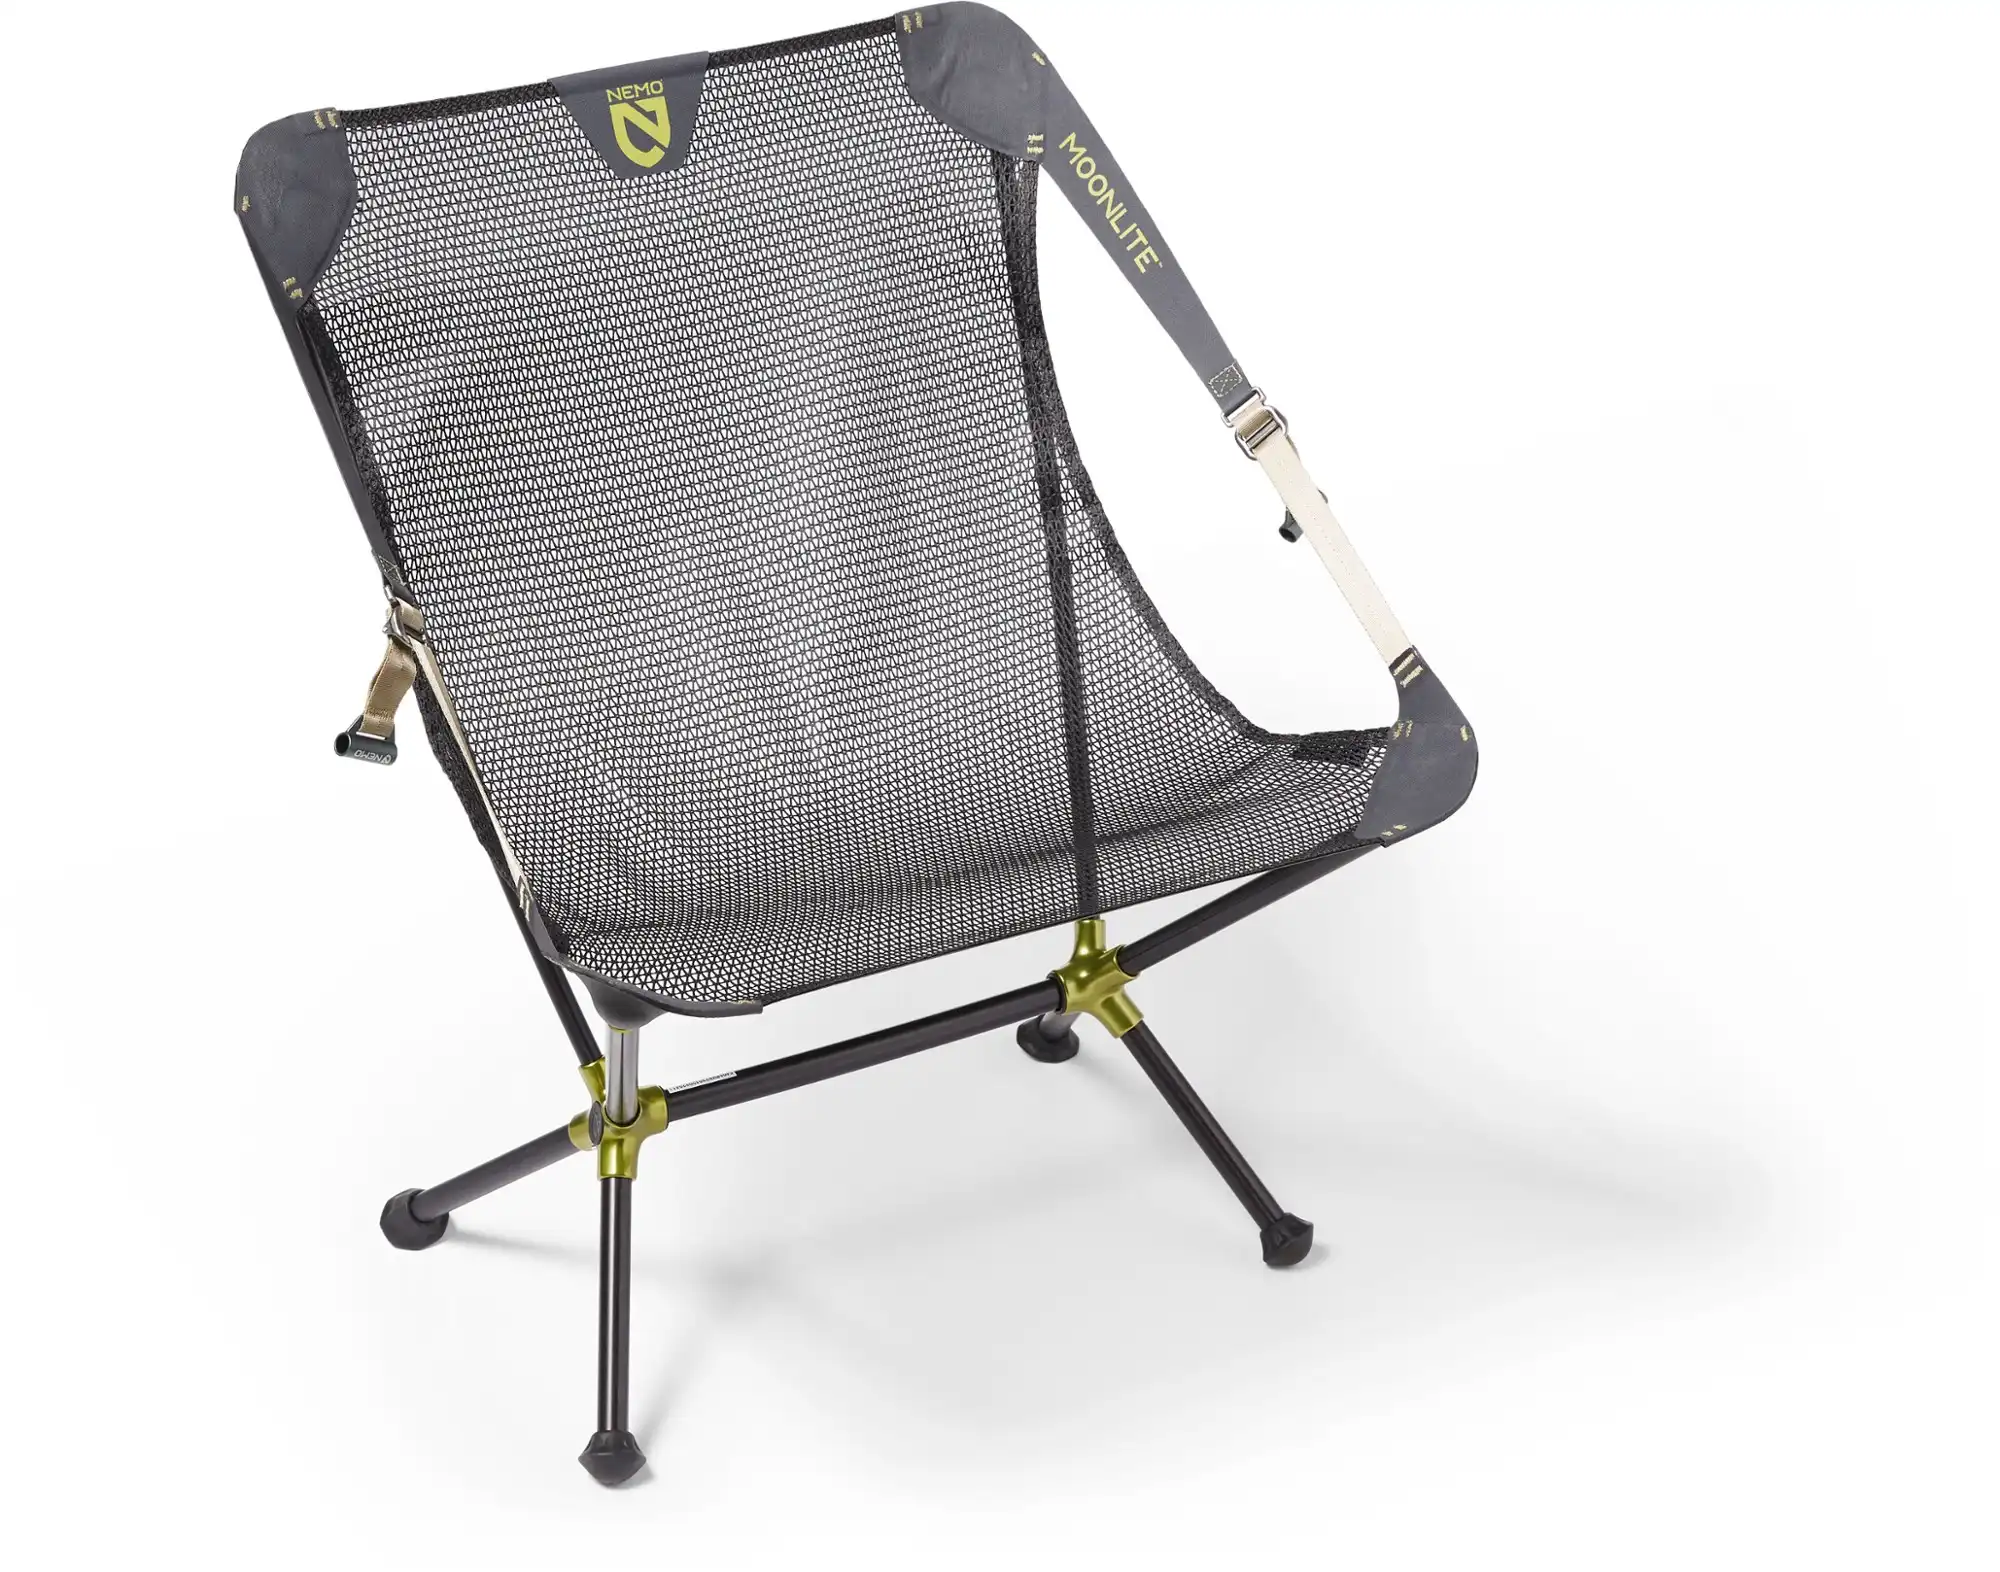 NEMO Moonlite Reclining Camp Chair at REI